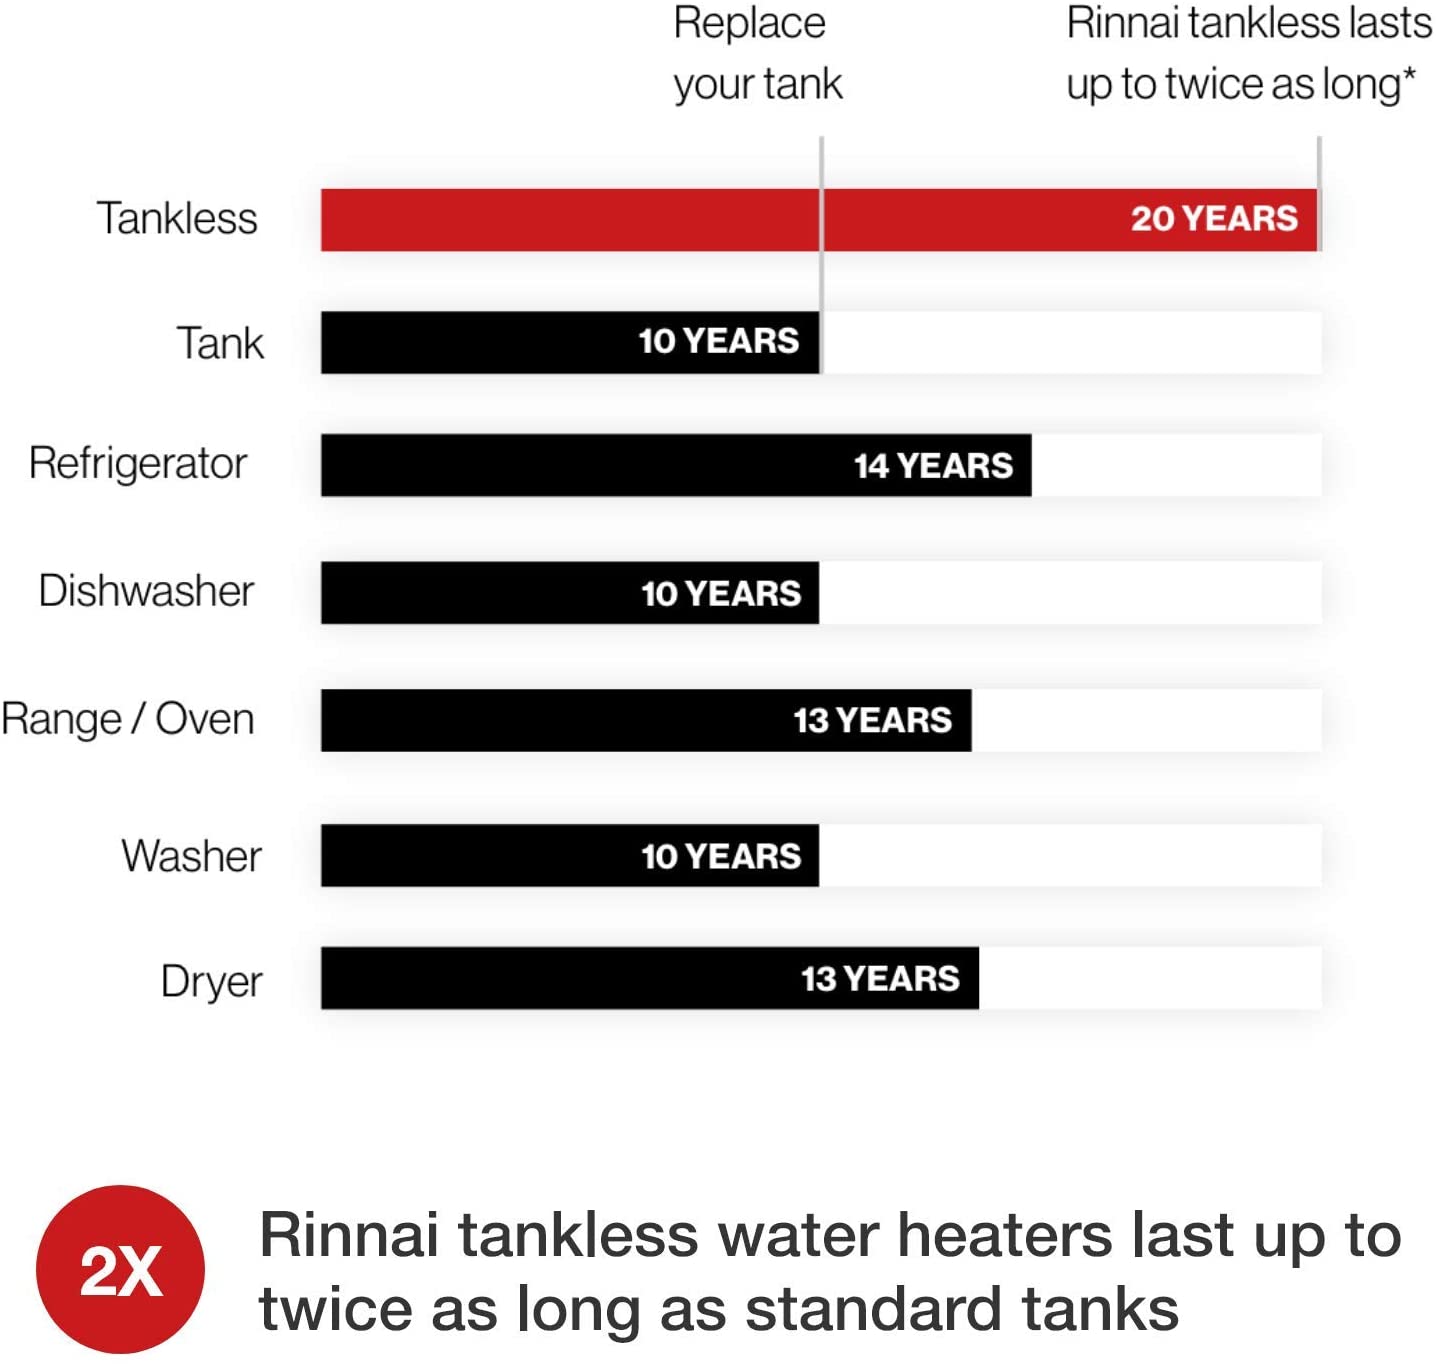 Rinnai RU180iN 10 GPM Indoor Whole Home Natural Gas Condensing Tankless Water Heater New